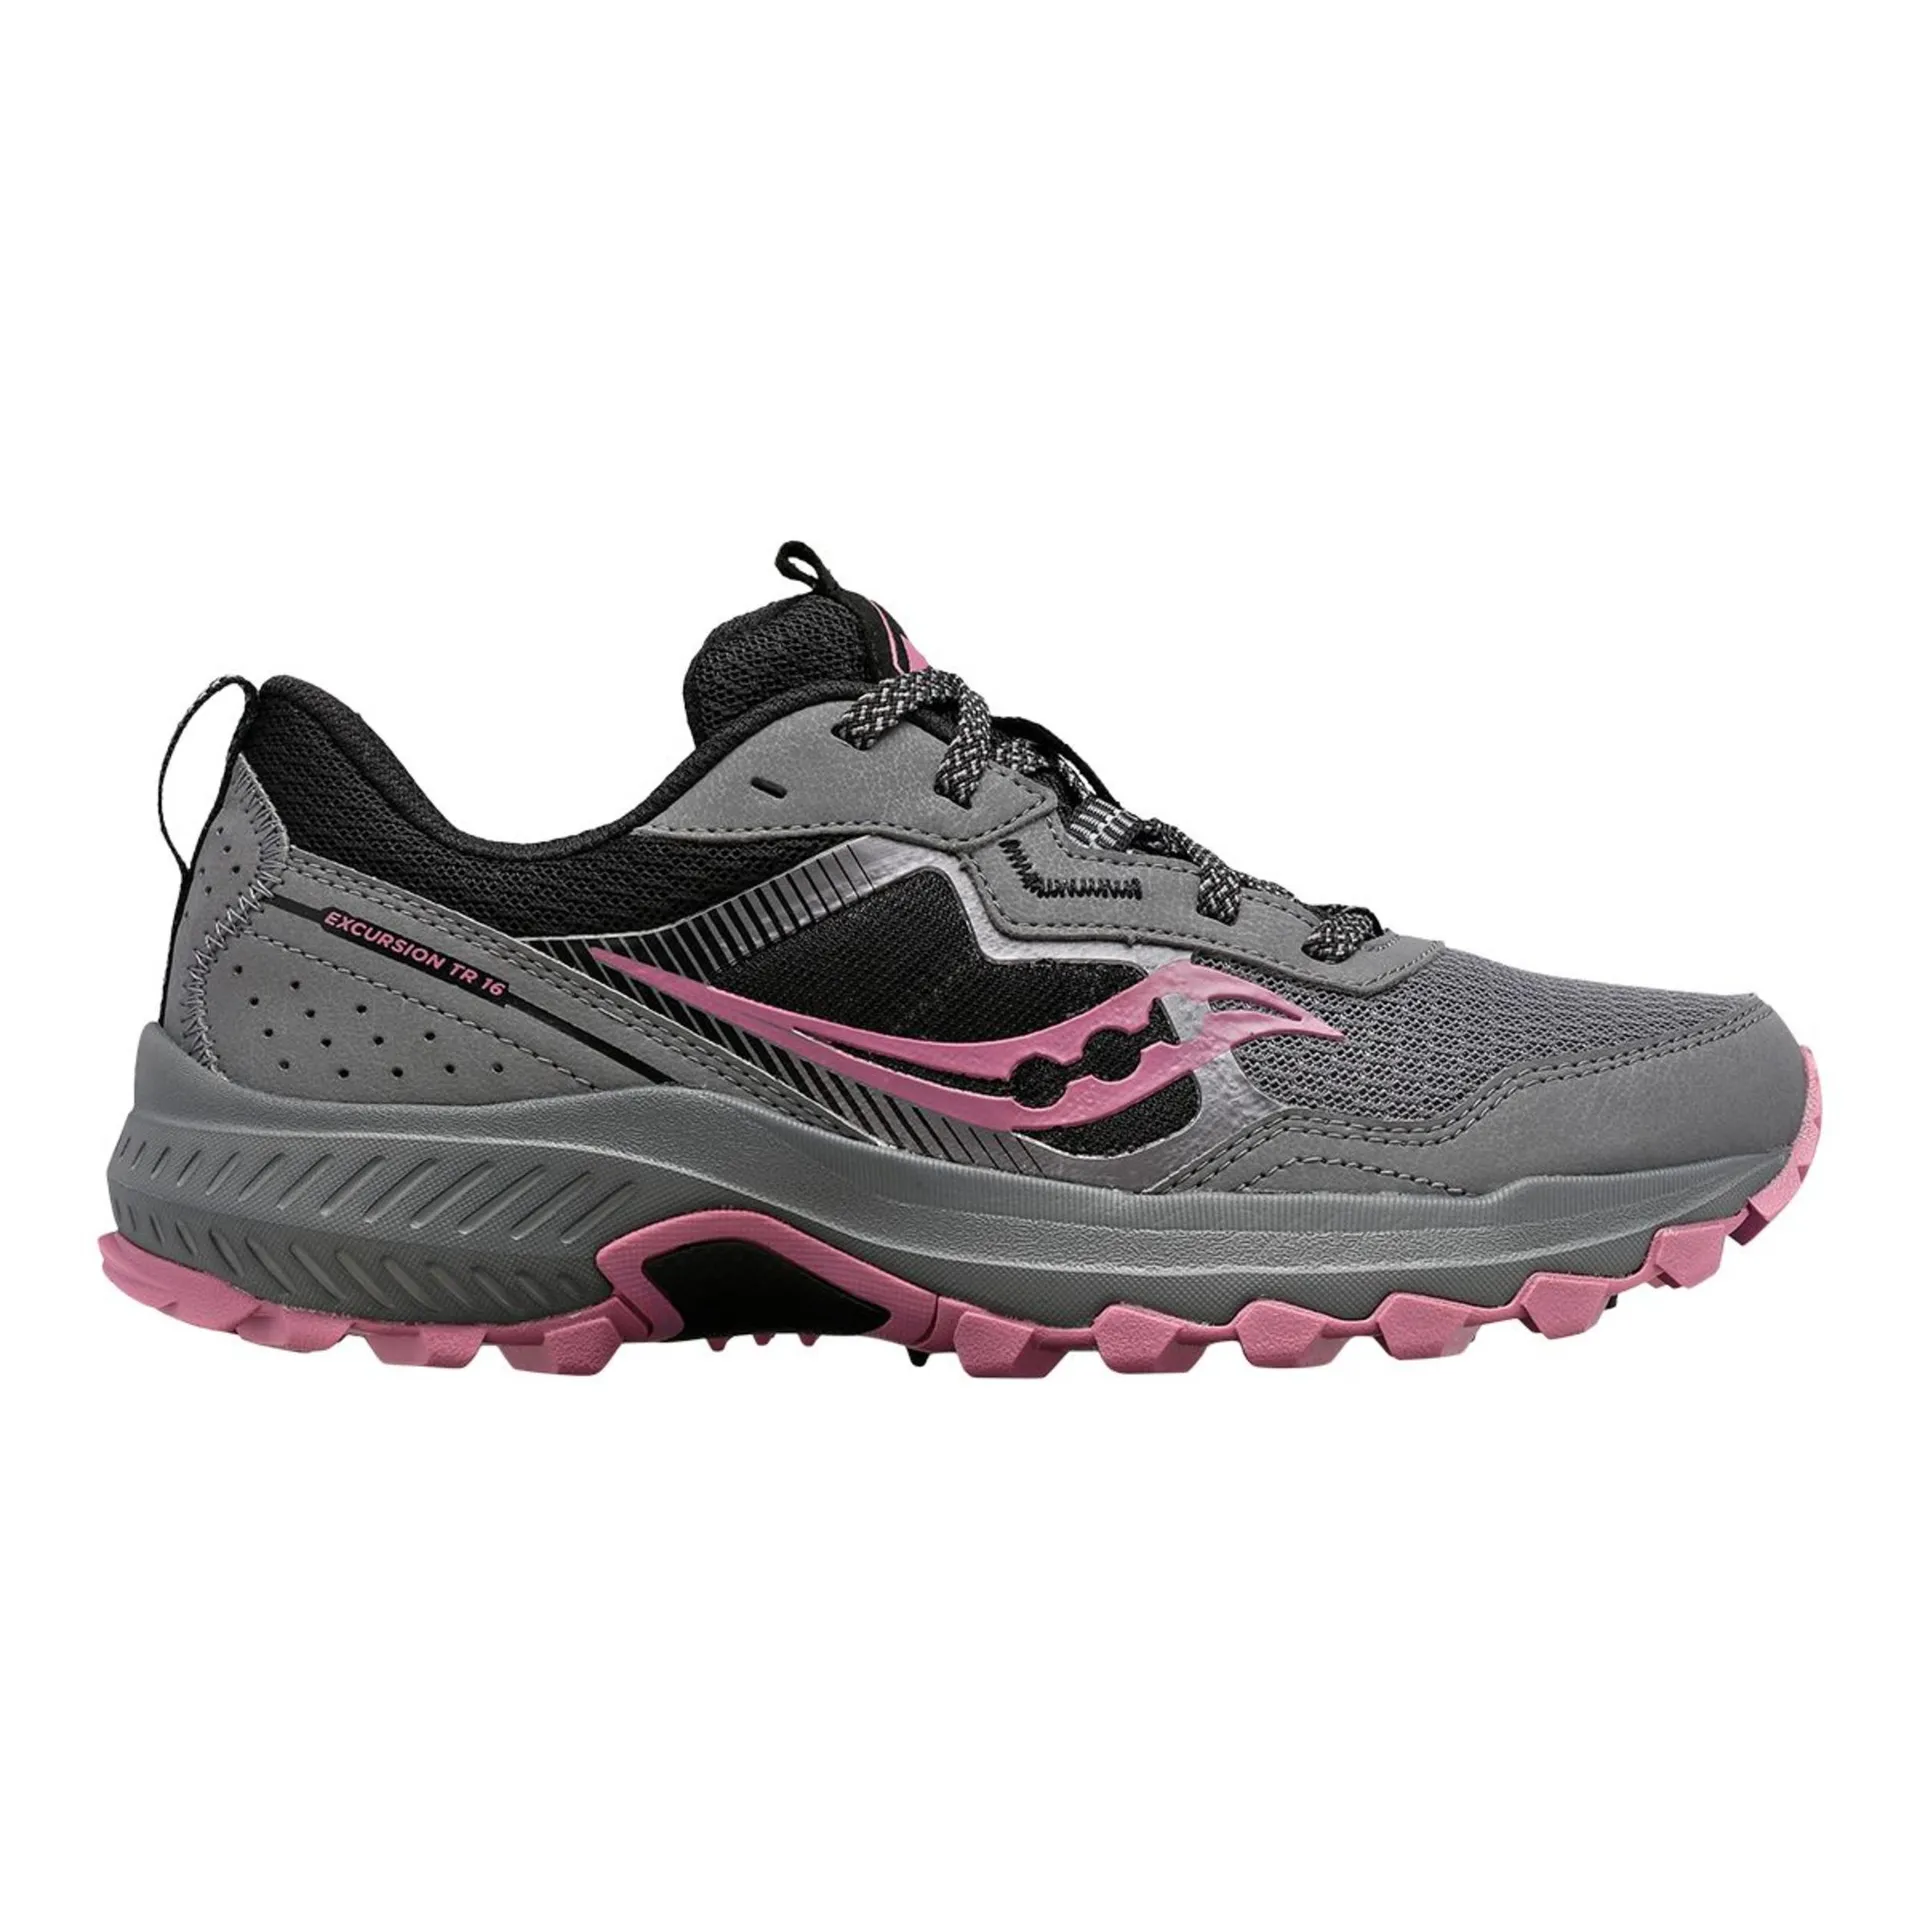 Saucony Women's Excursion TR16 Cushioned Comfortable Trail Running Shoes